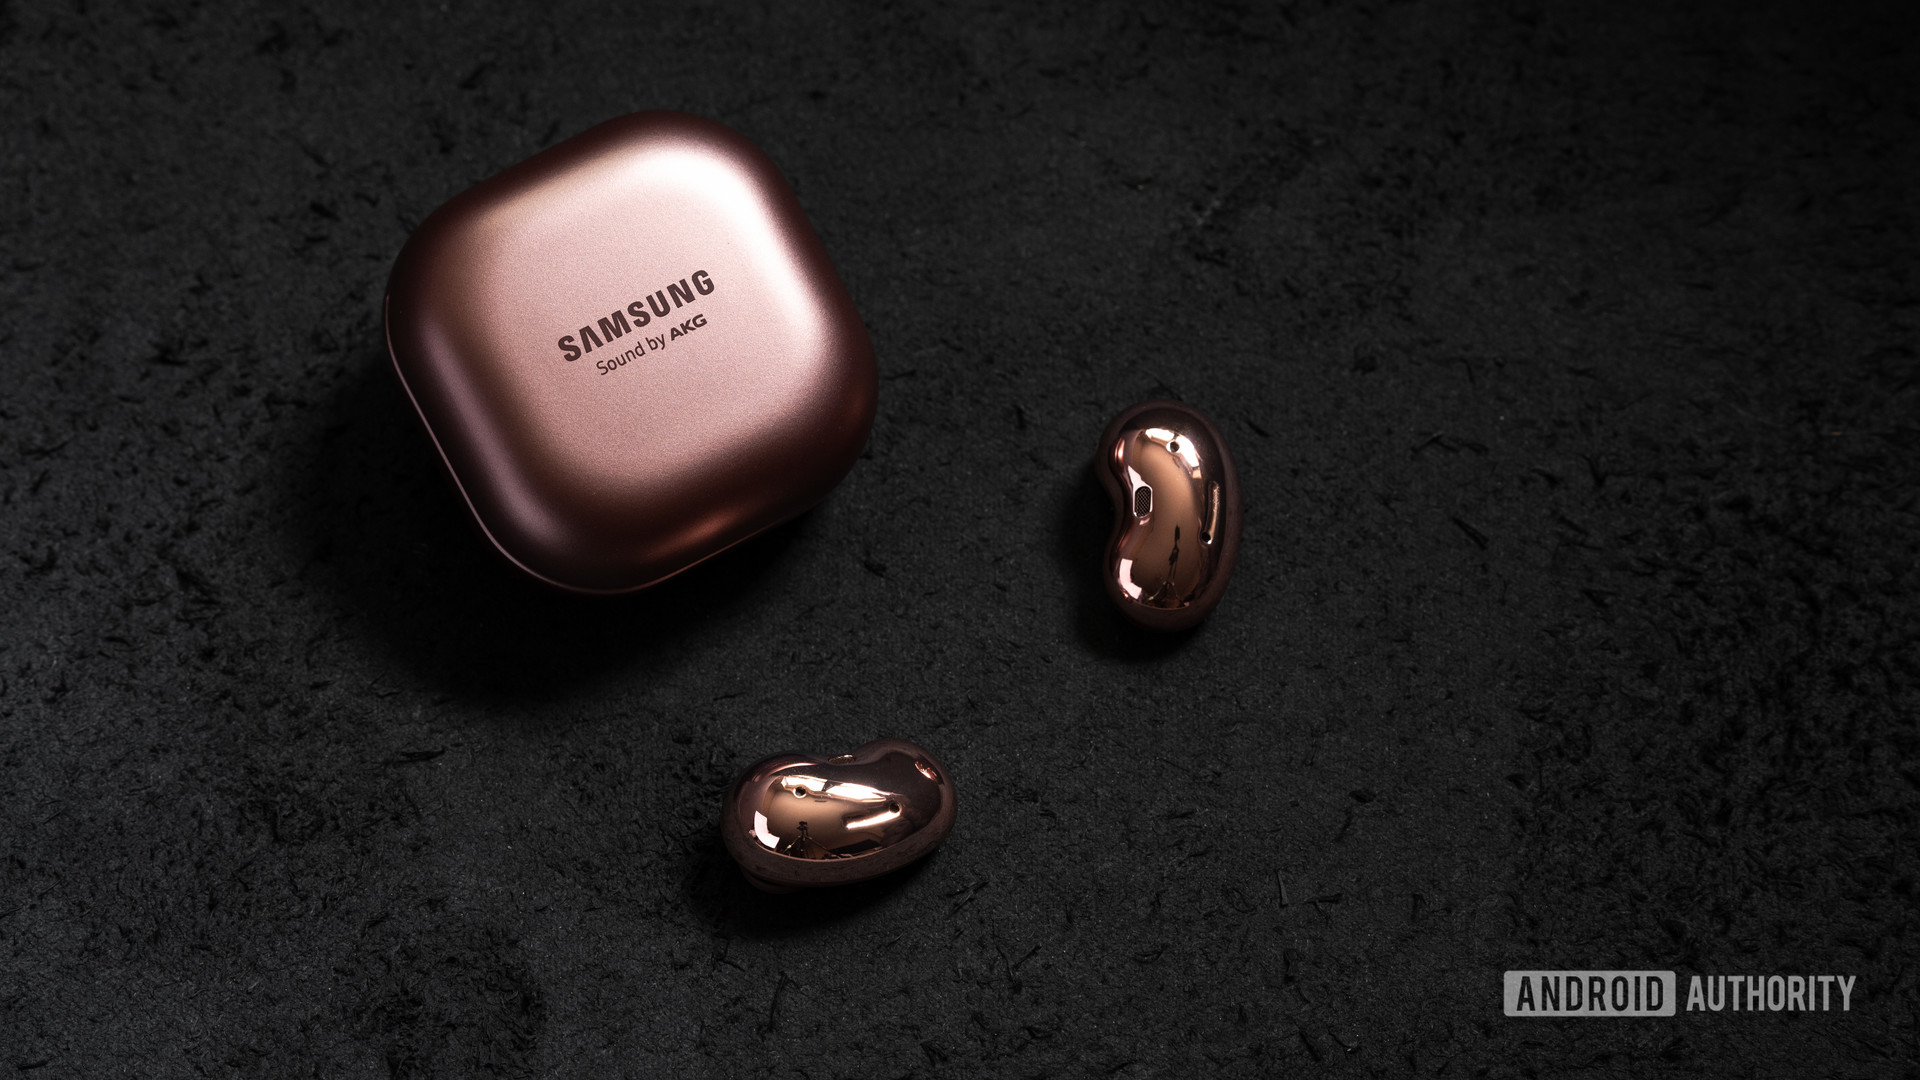 The Samsung Galaxy Buds Live noise cancelling true wireless earbuds outside of the closed case and on a black surface.